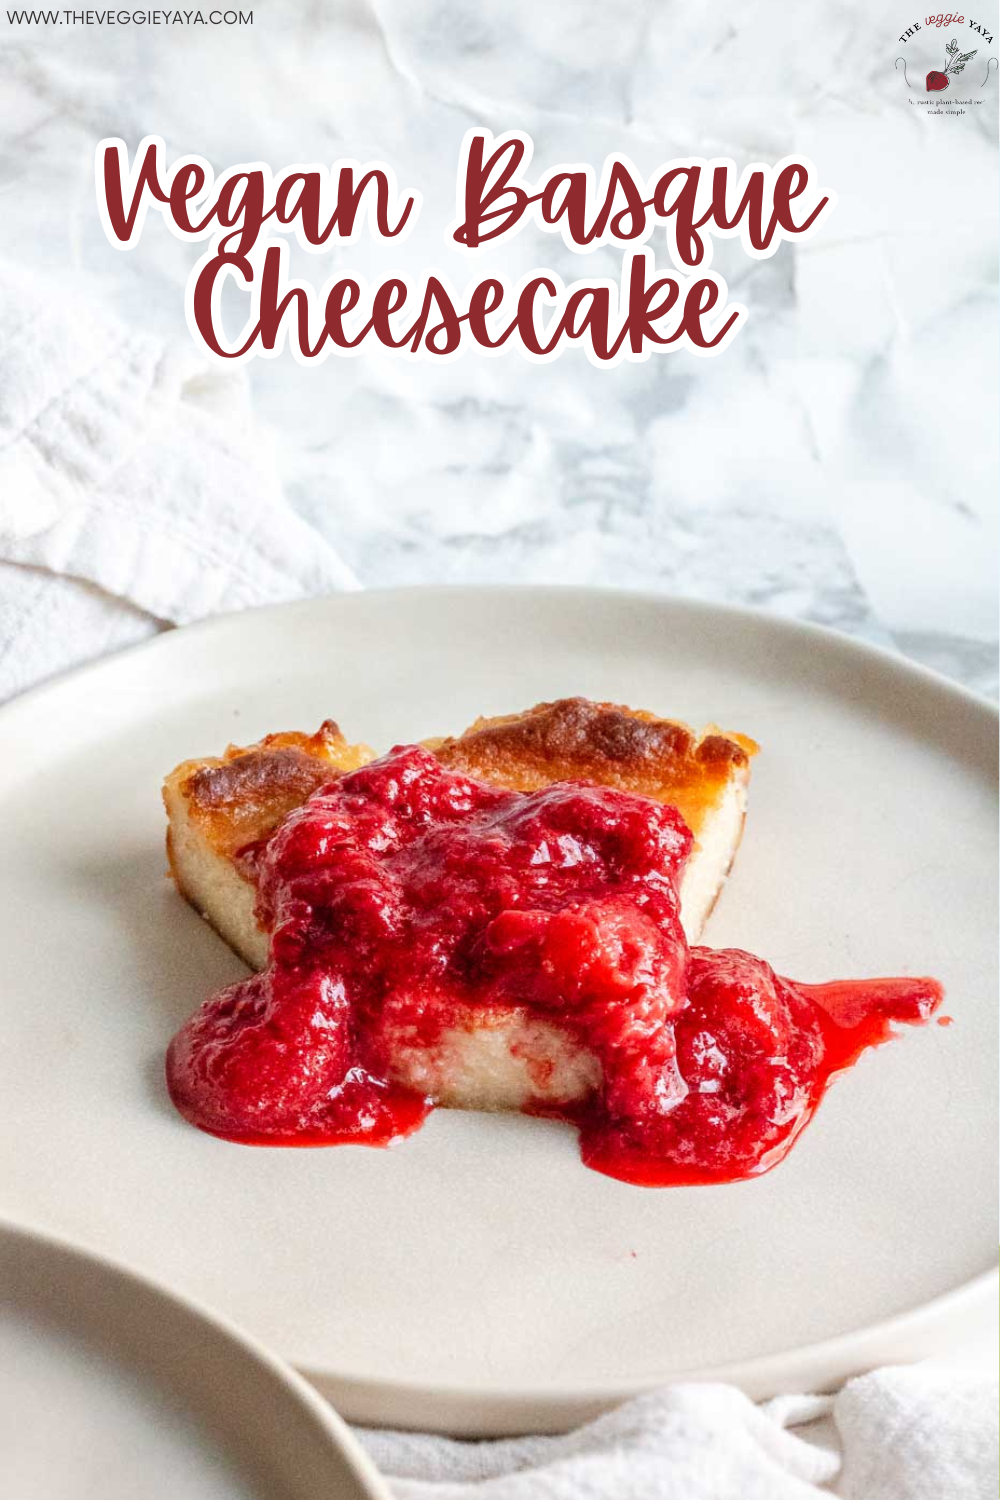 Vegan basque cheesecake pin with red text.